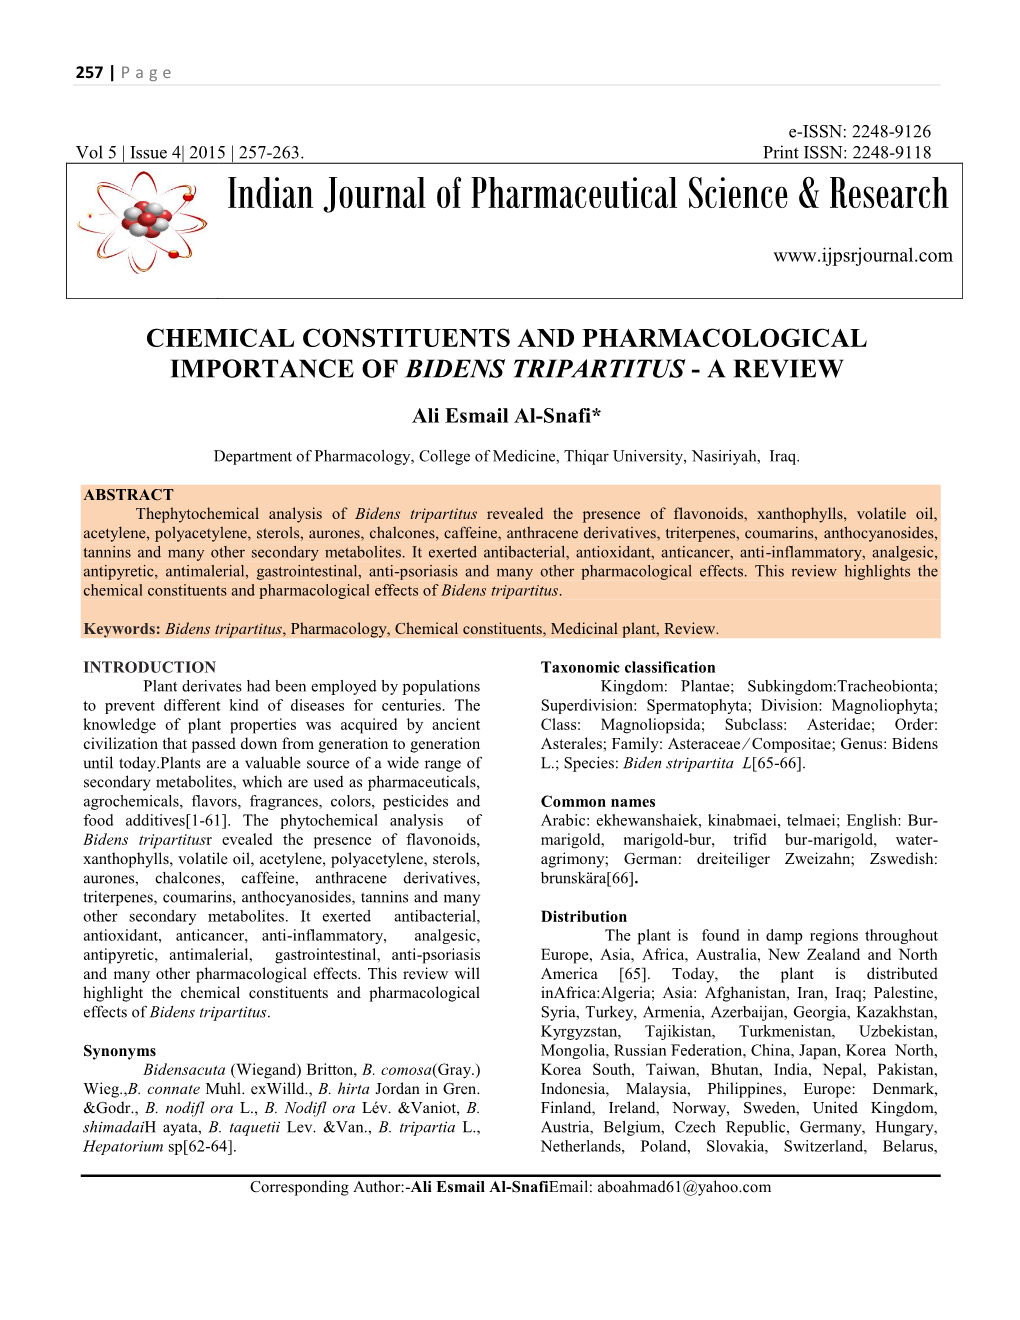 Chemical Constituents and Pharmacological Importance of Bidens Tripartitus - a Review